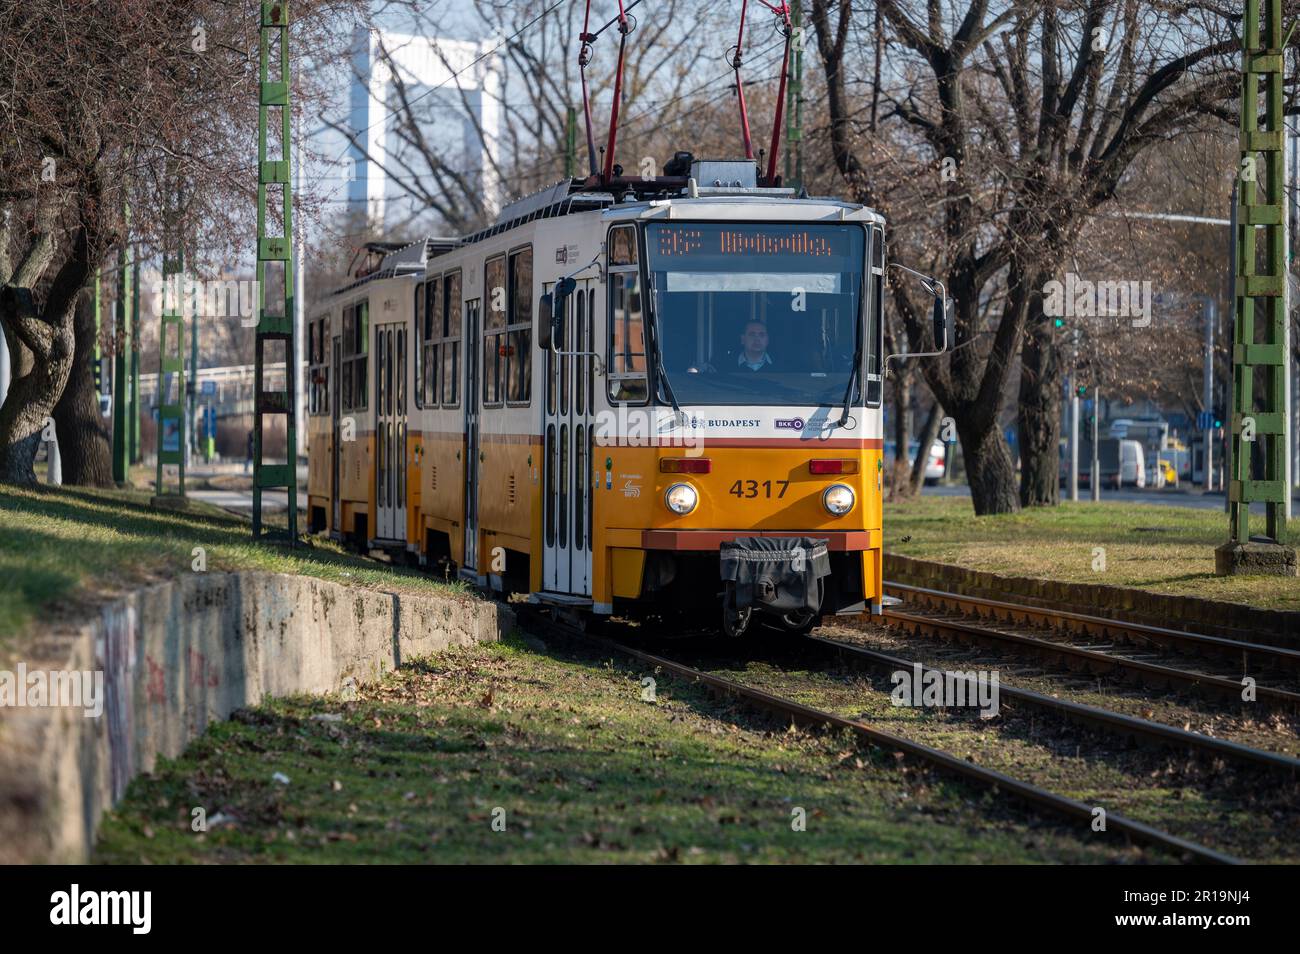 Distinctive yellow and white railway train and carriage providing transportation around the Hungarian capital city of Budapest Stock Photo